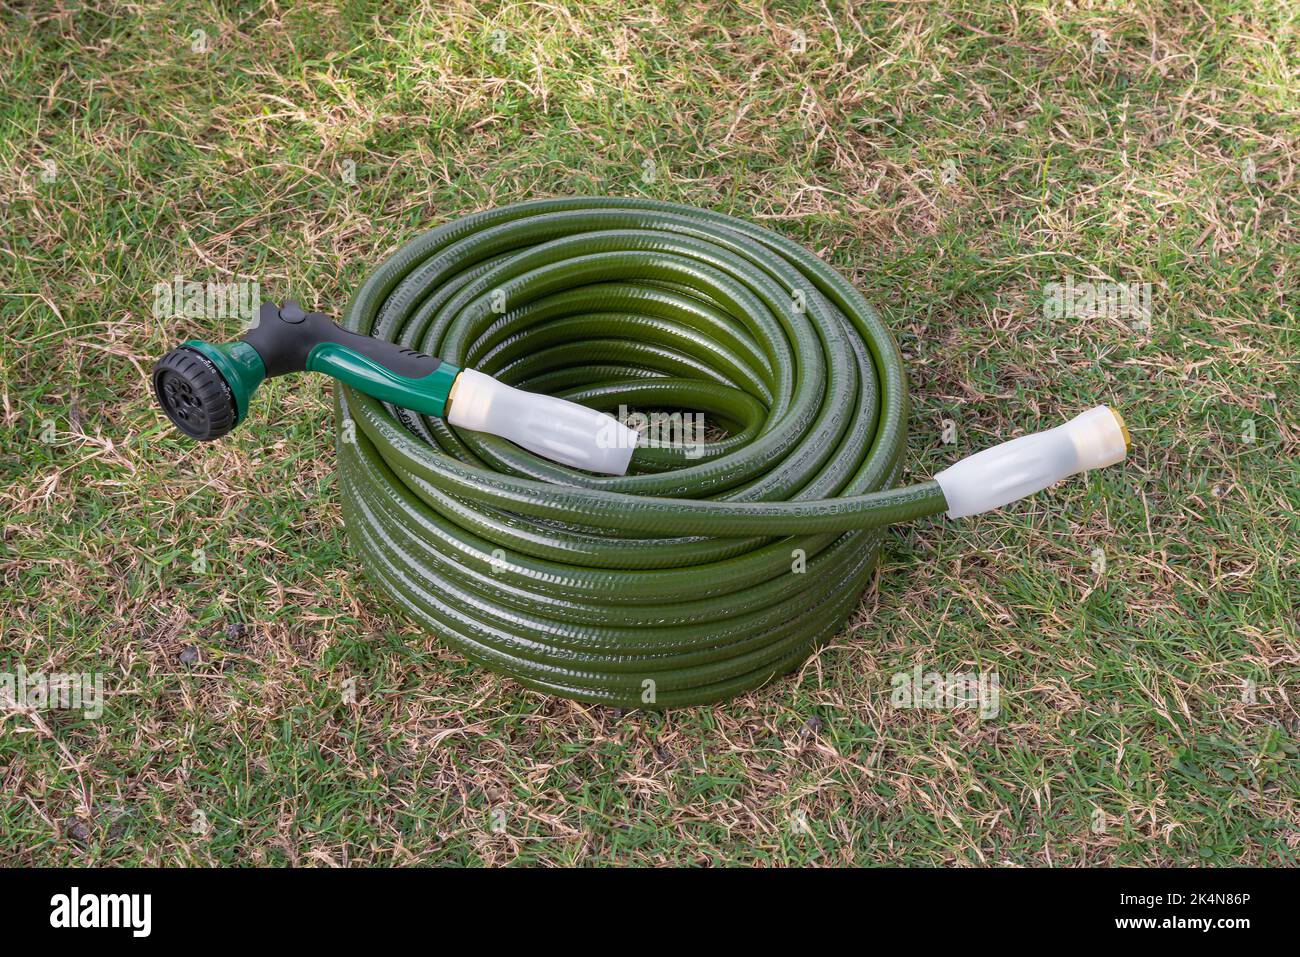 Garden hose green lawn new gardening equipment wrapped up coiled Stock Photo